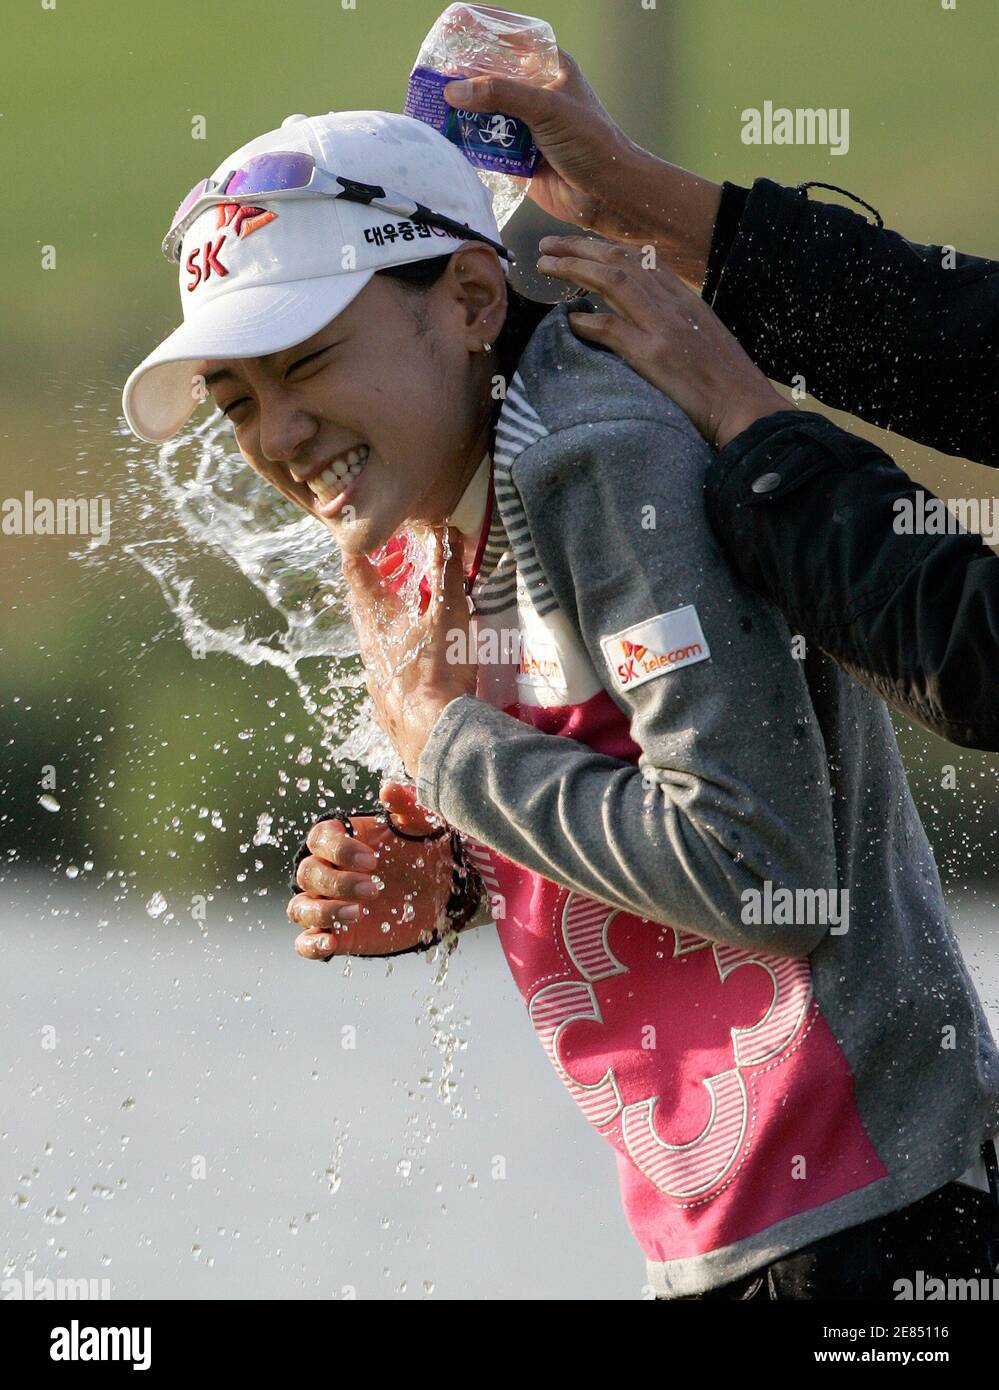 Choi Na-yeon of South Korea is congratulated by compatriot Kim Song-hee on  the 18th green after Choi's victory at the LPGA Hana Bank-Kolon Championship  golf tournament at Sky72 Golf Club Ocean course